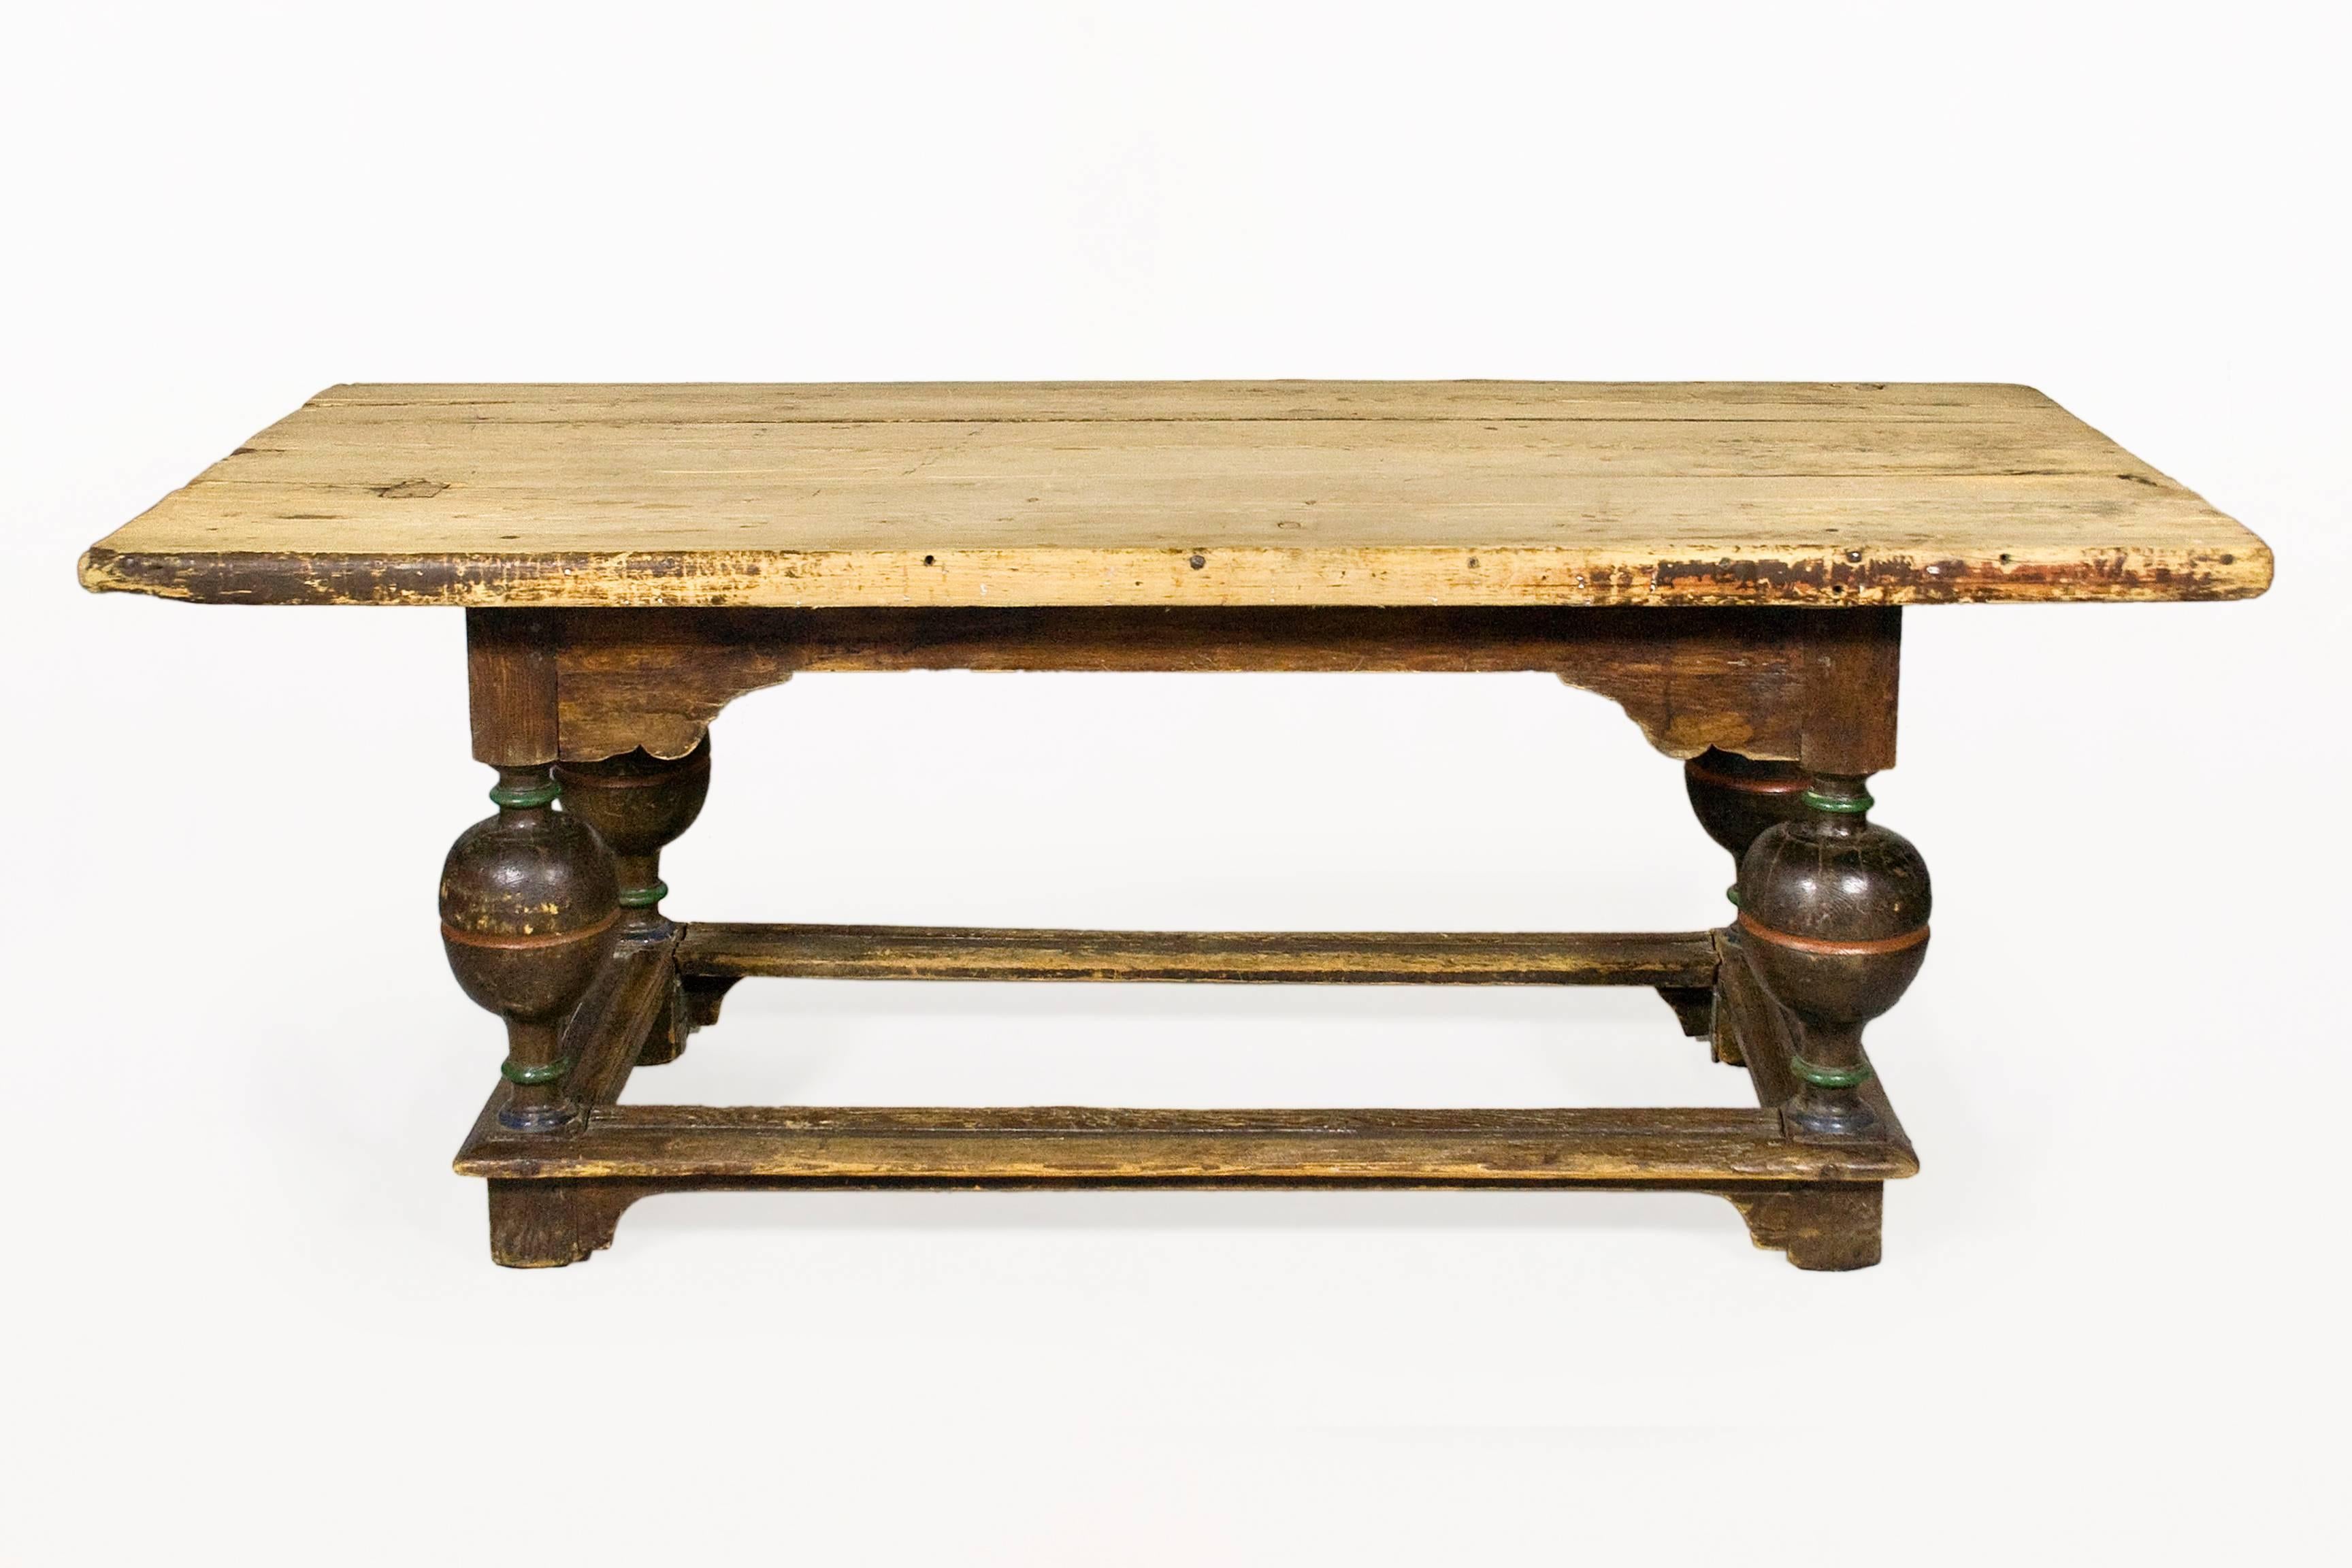 Swedish Barocco console
Wooden console
18th century, Sweden
Very good vintage condition.